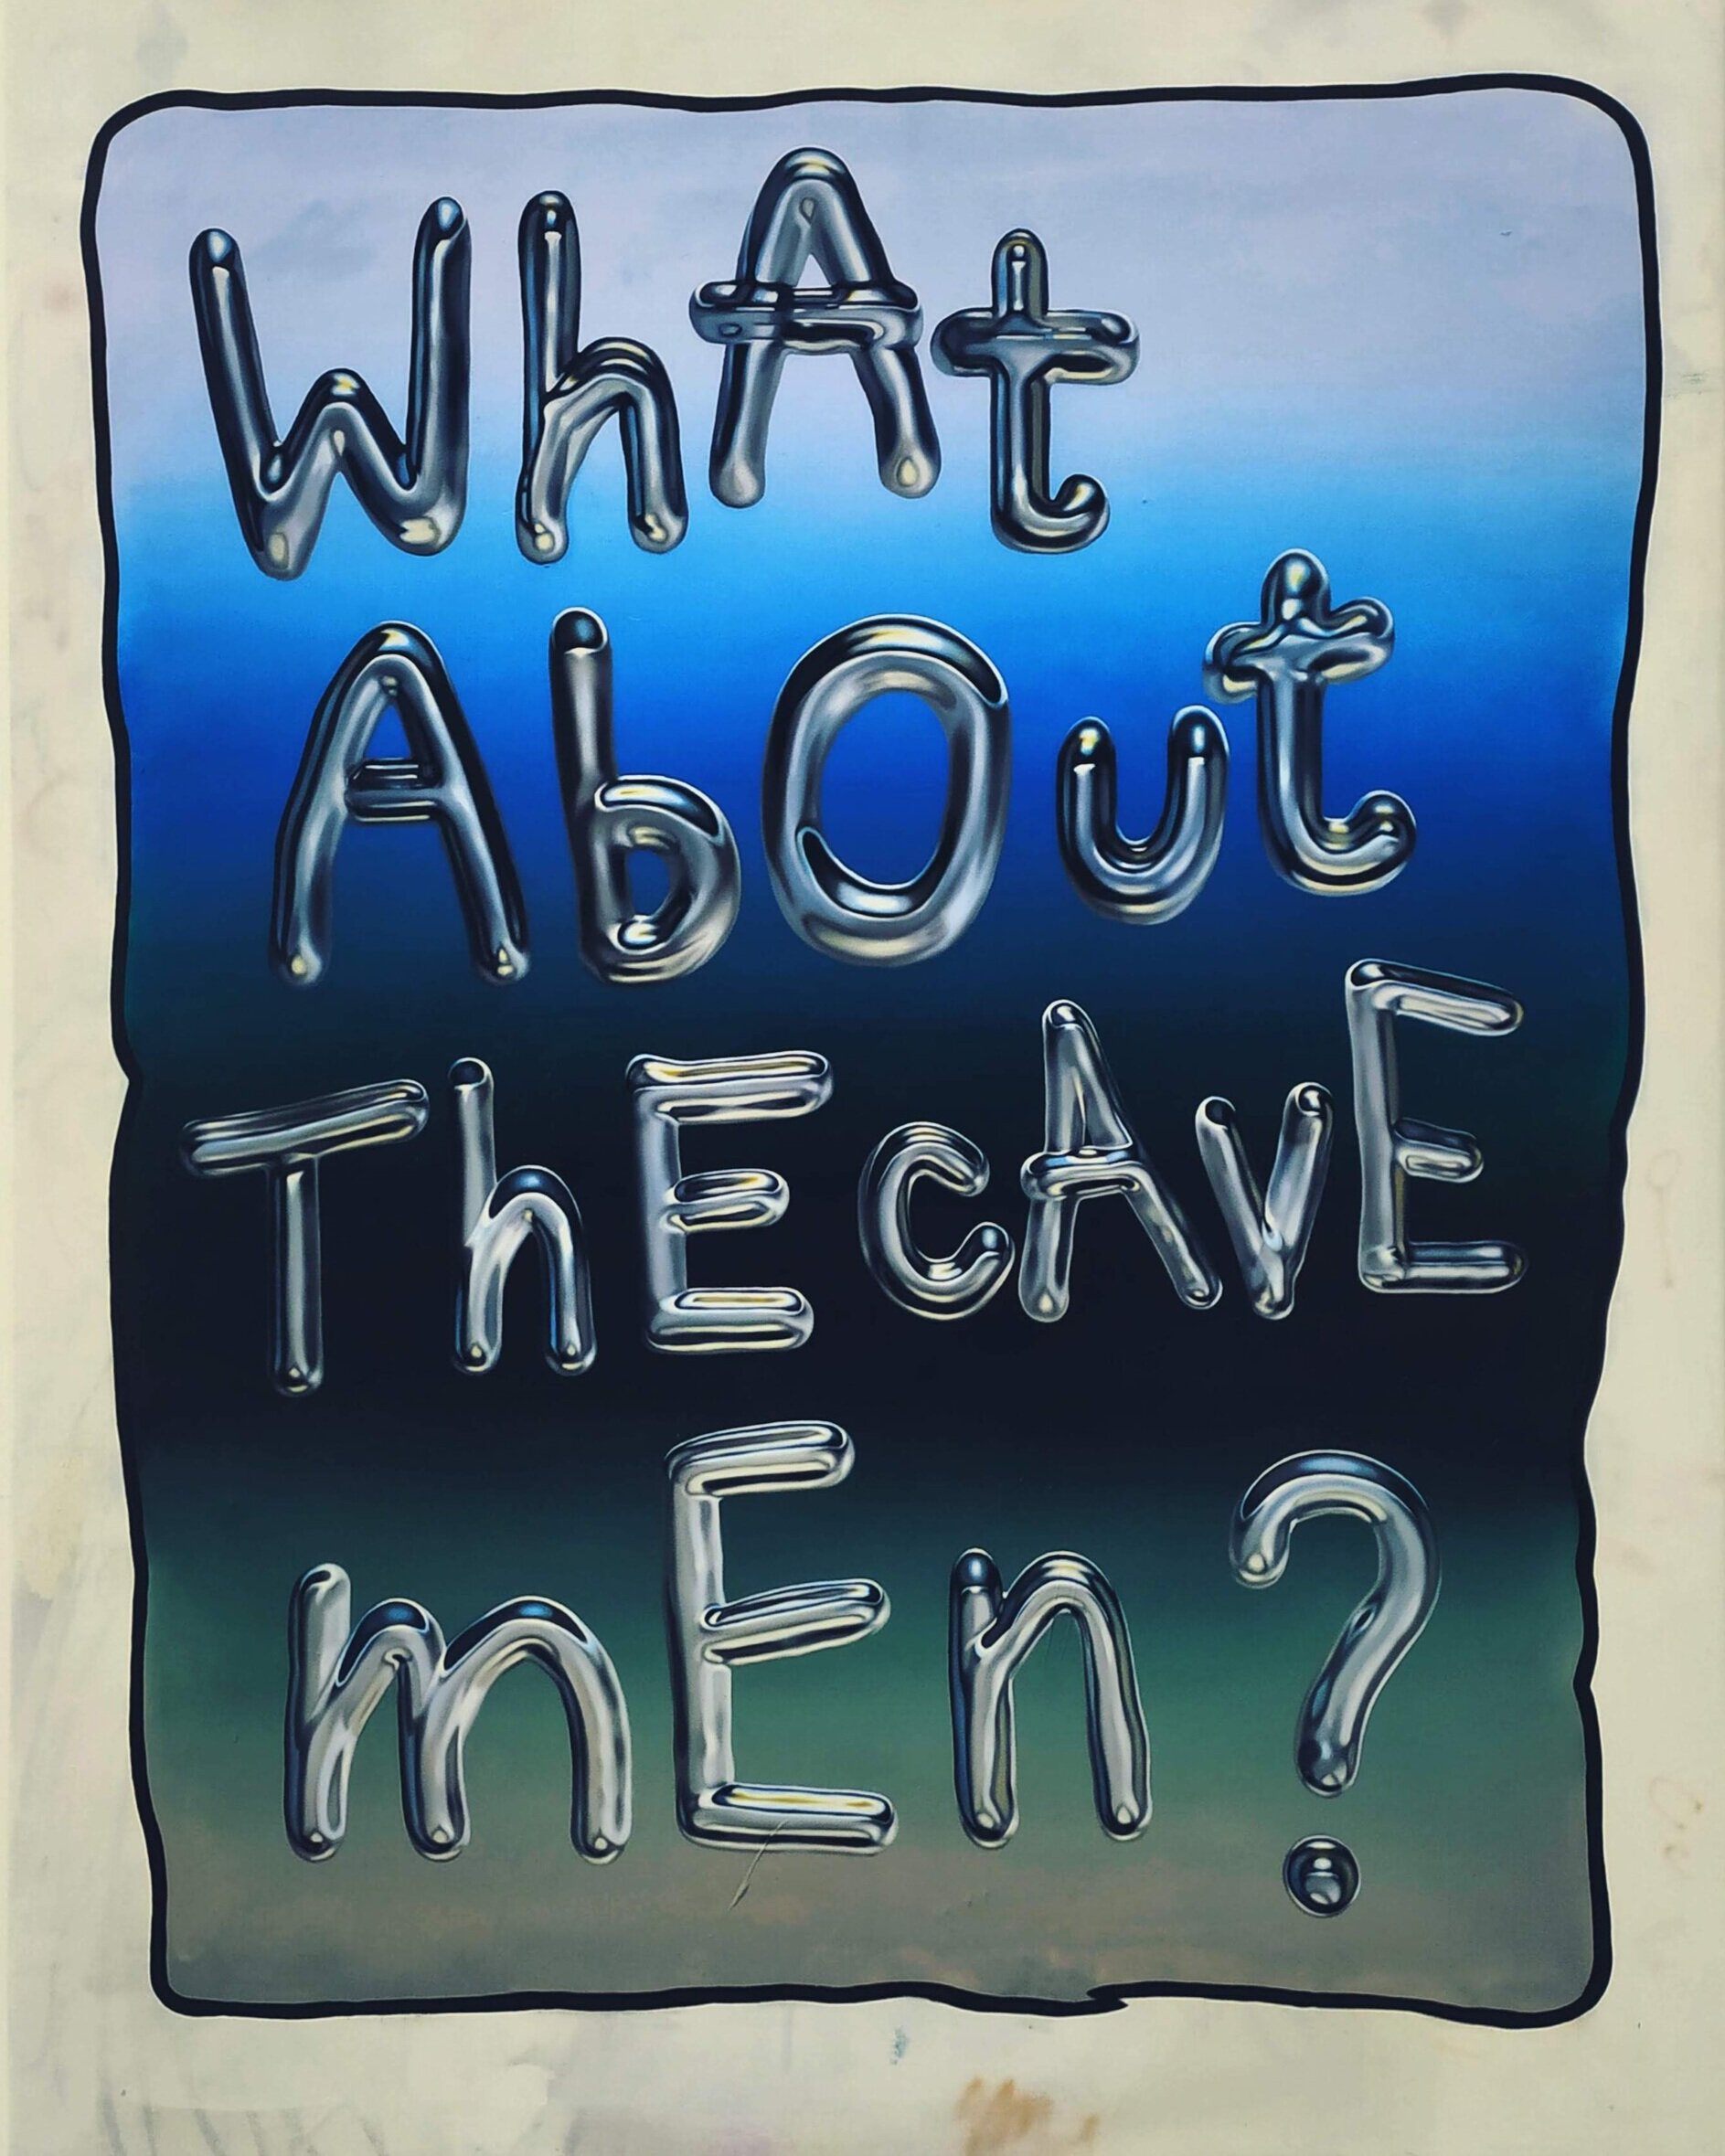  WhAt AbOut ThE cAvE mEn?, 2019, oil on canvas, 175cm x 135cm 